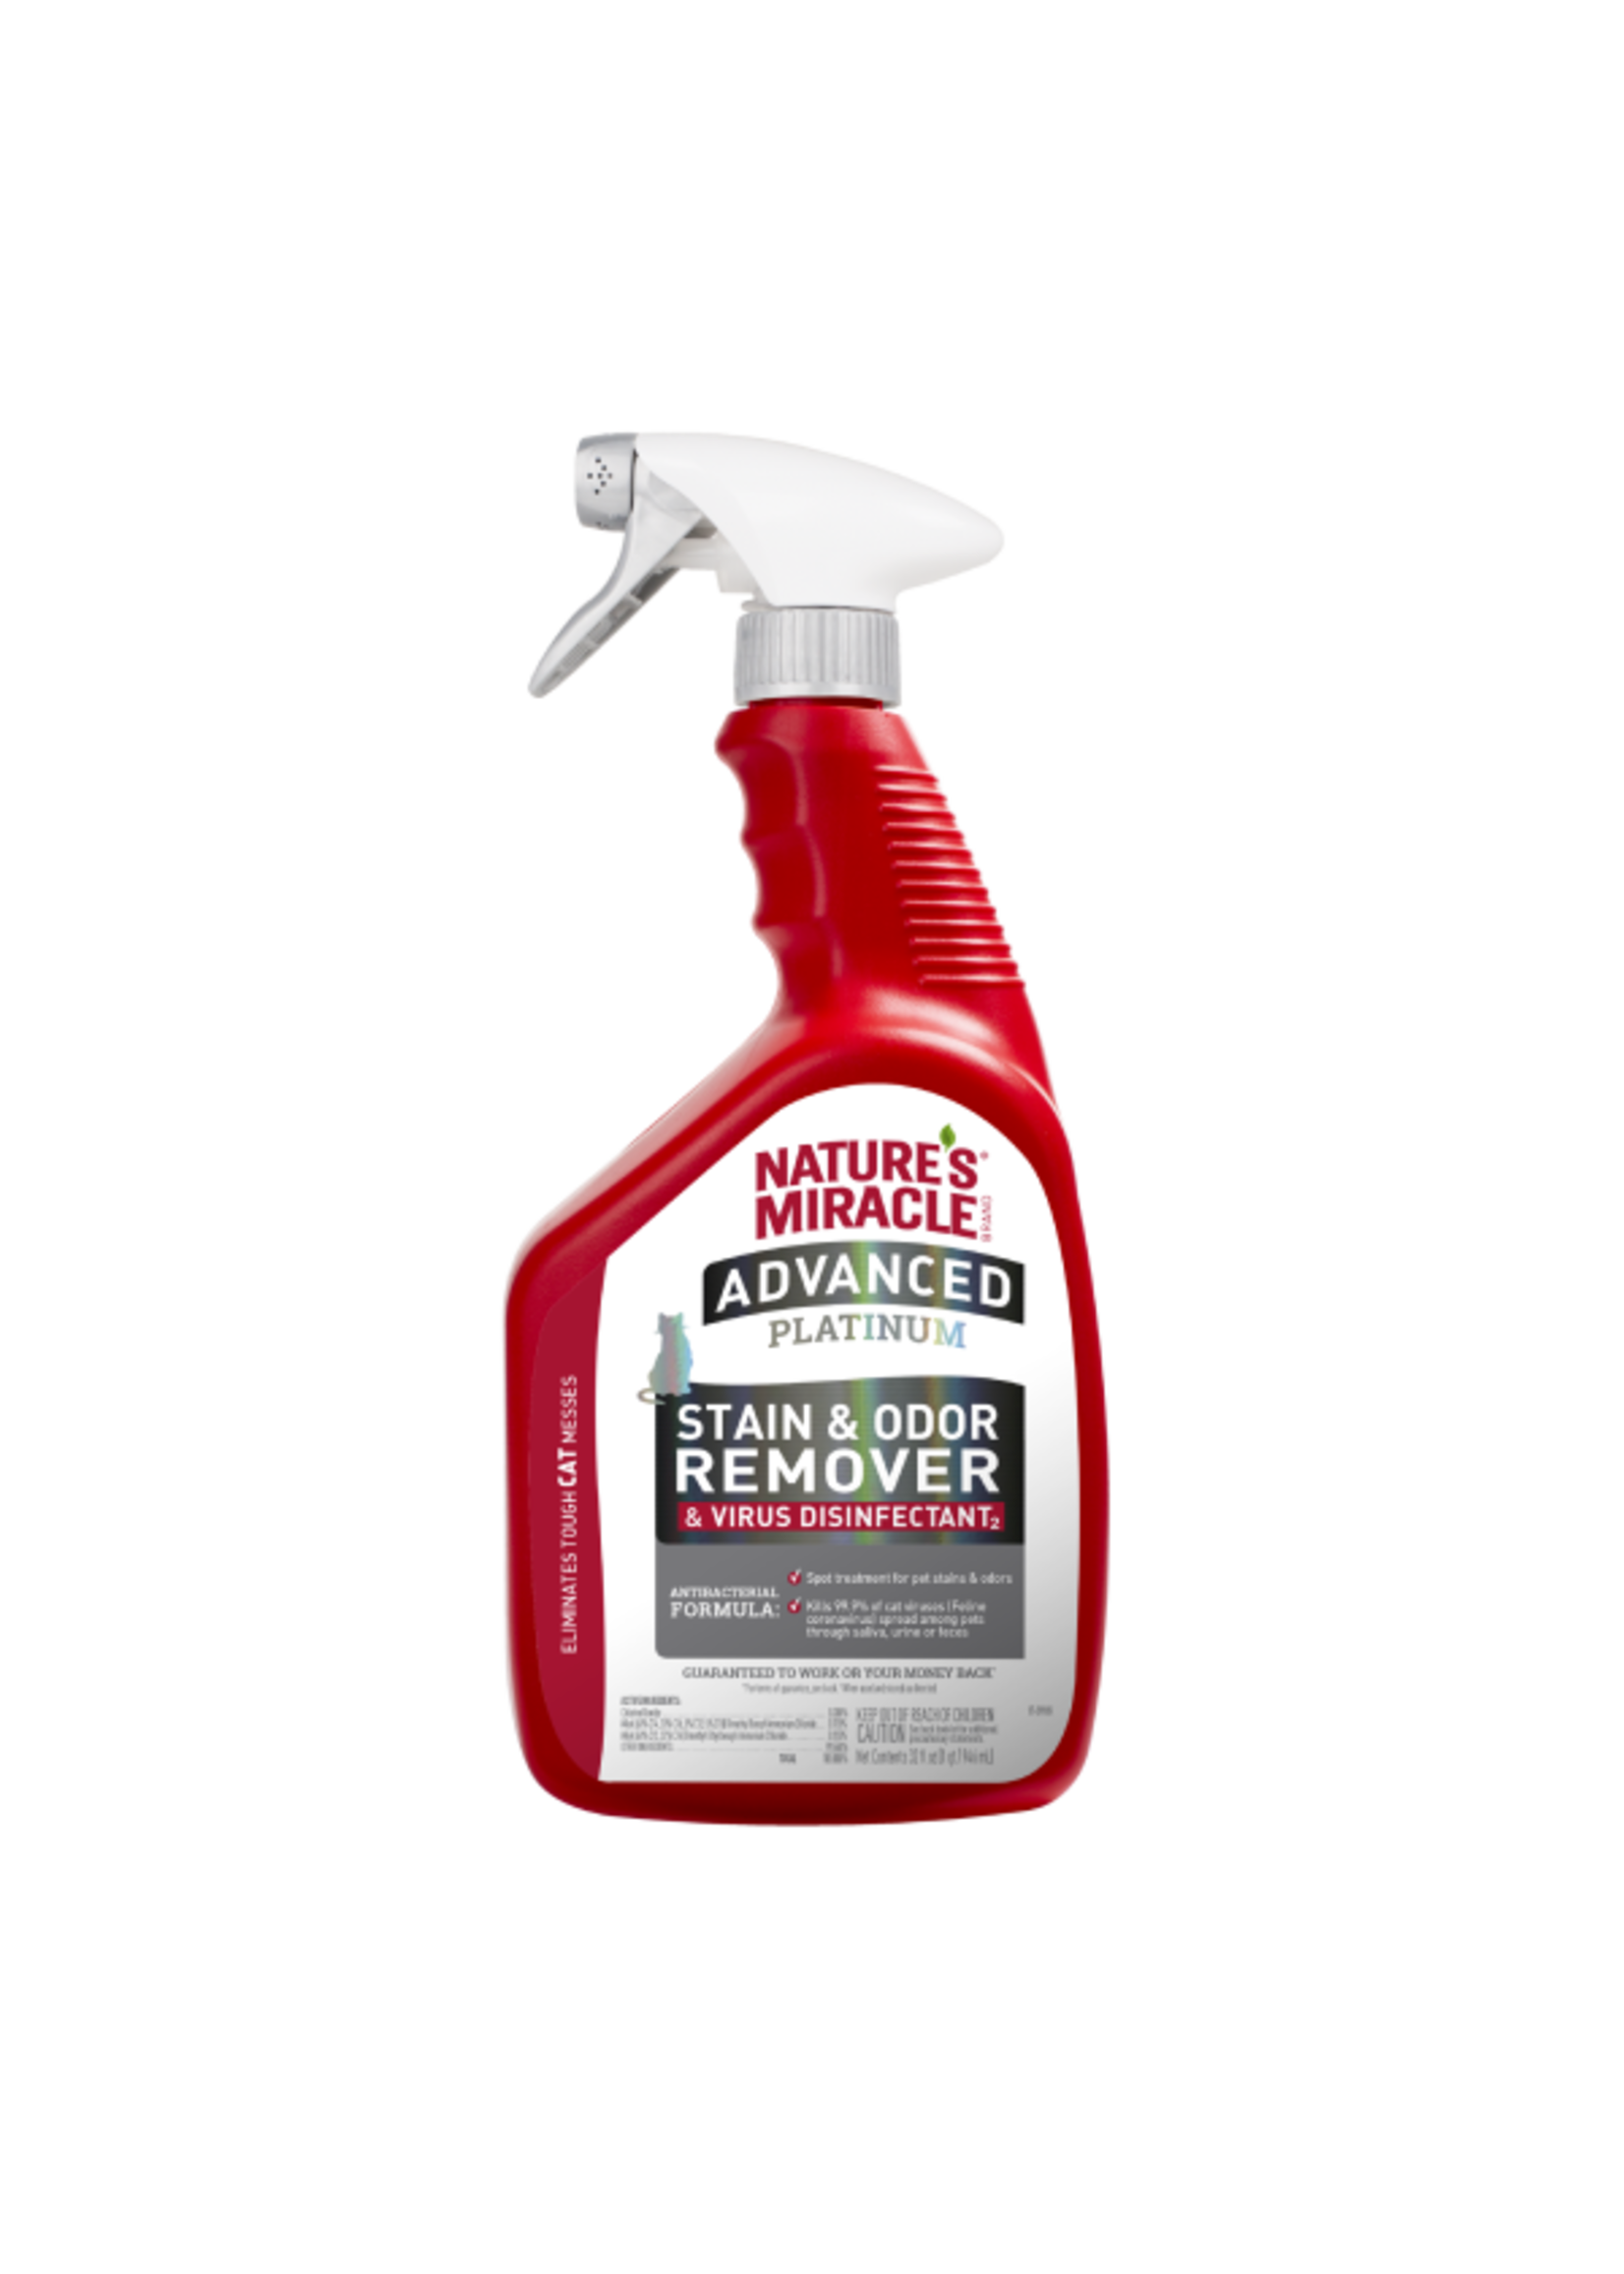 Nature's Miracle Natures Miracle - Cat Advanced Platinum Stain Odour & Virus Disnfct 32 oz